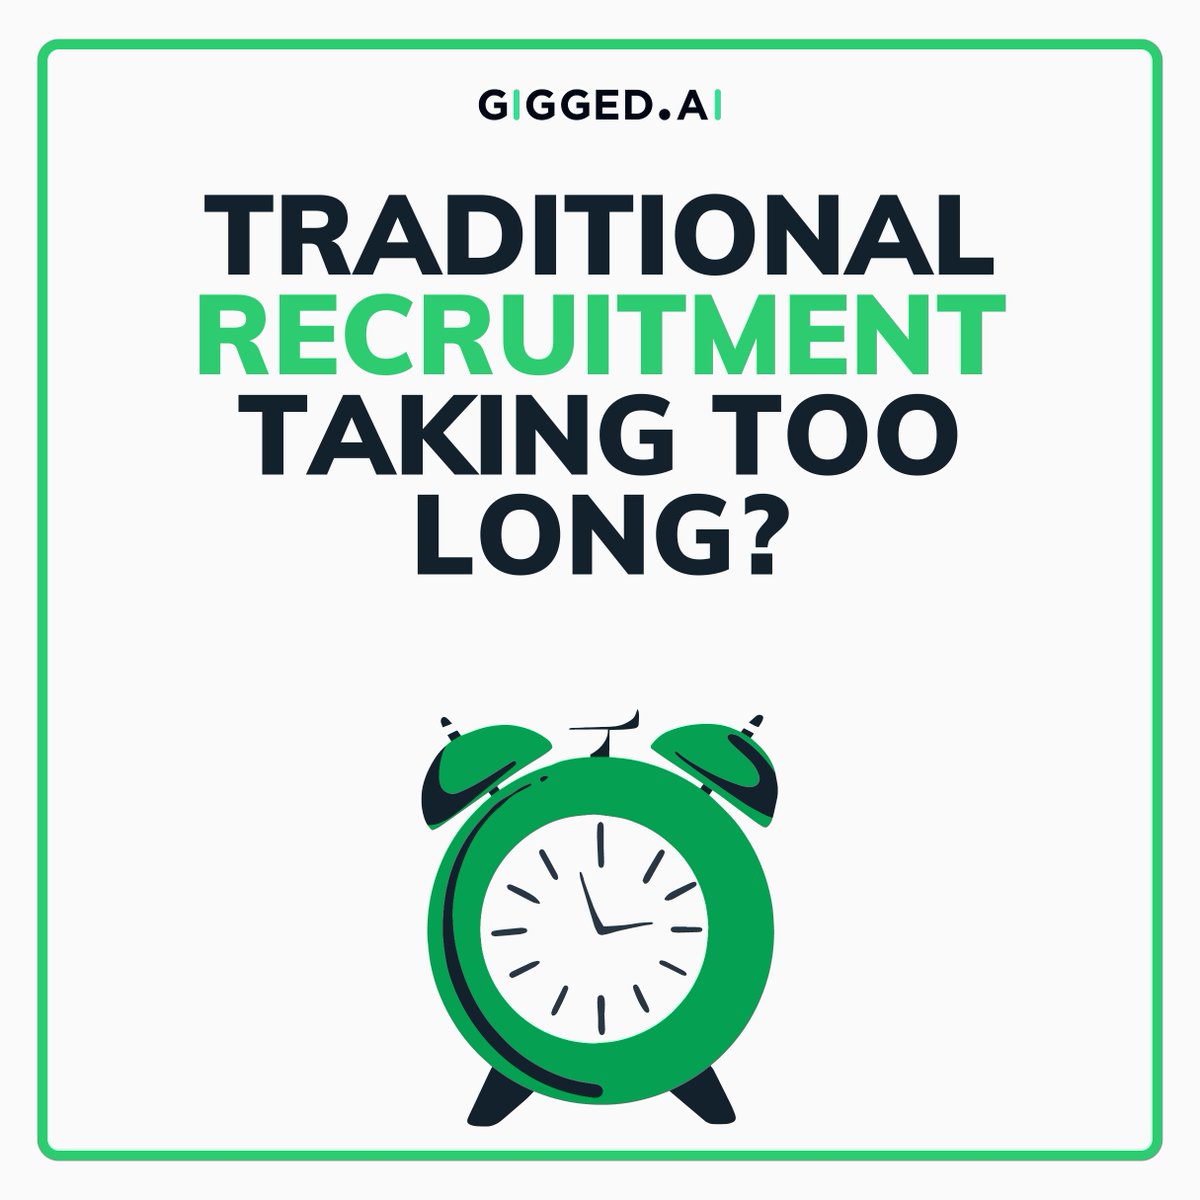 Tired of traditional recruitment taking up too much time? 

Gigged AI is here to streamline the process for you. Our average time to hire is only 4.4 days, including all necessary compliance checks. #FutureofWork #HiringEfficiency